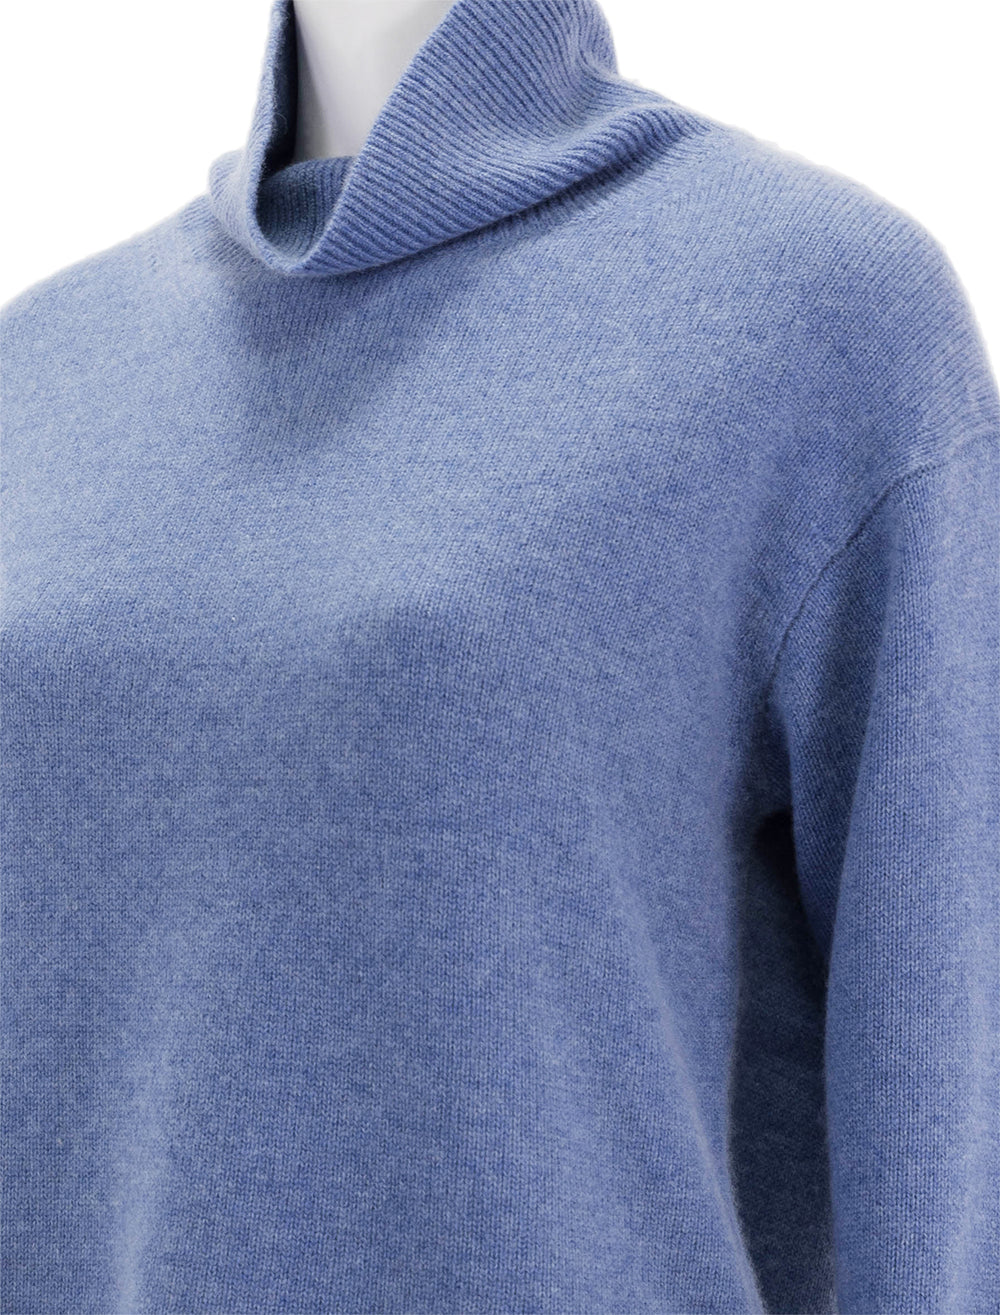 Close-up view of Alex Mill's cecile turtleneck sweater in cashmere heather blue.